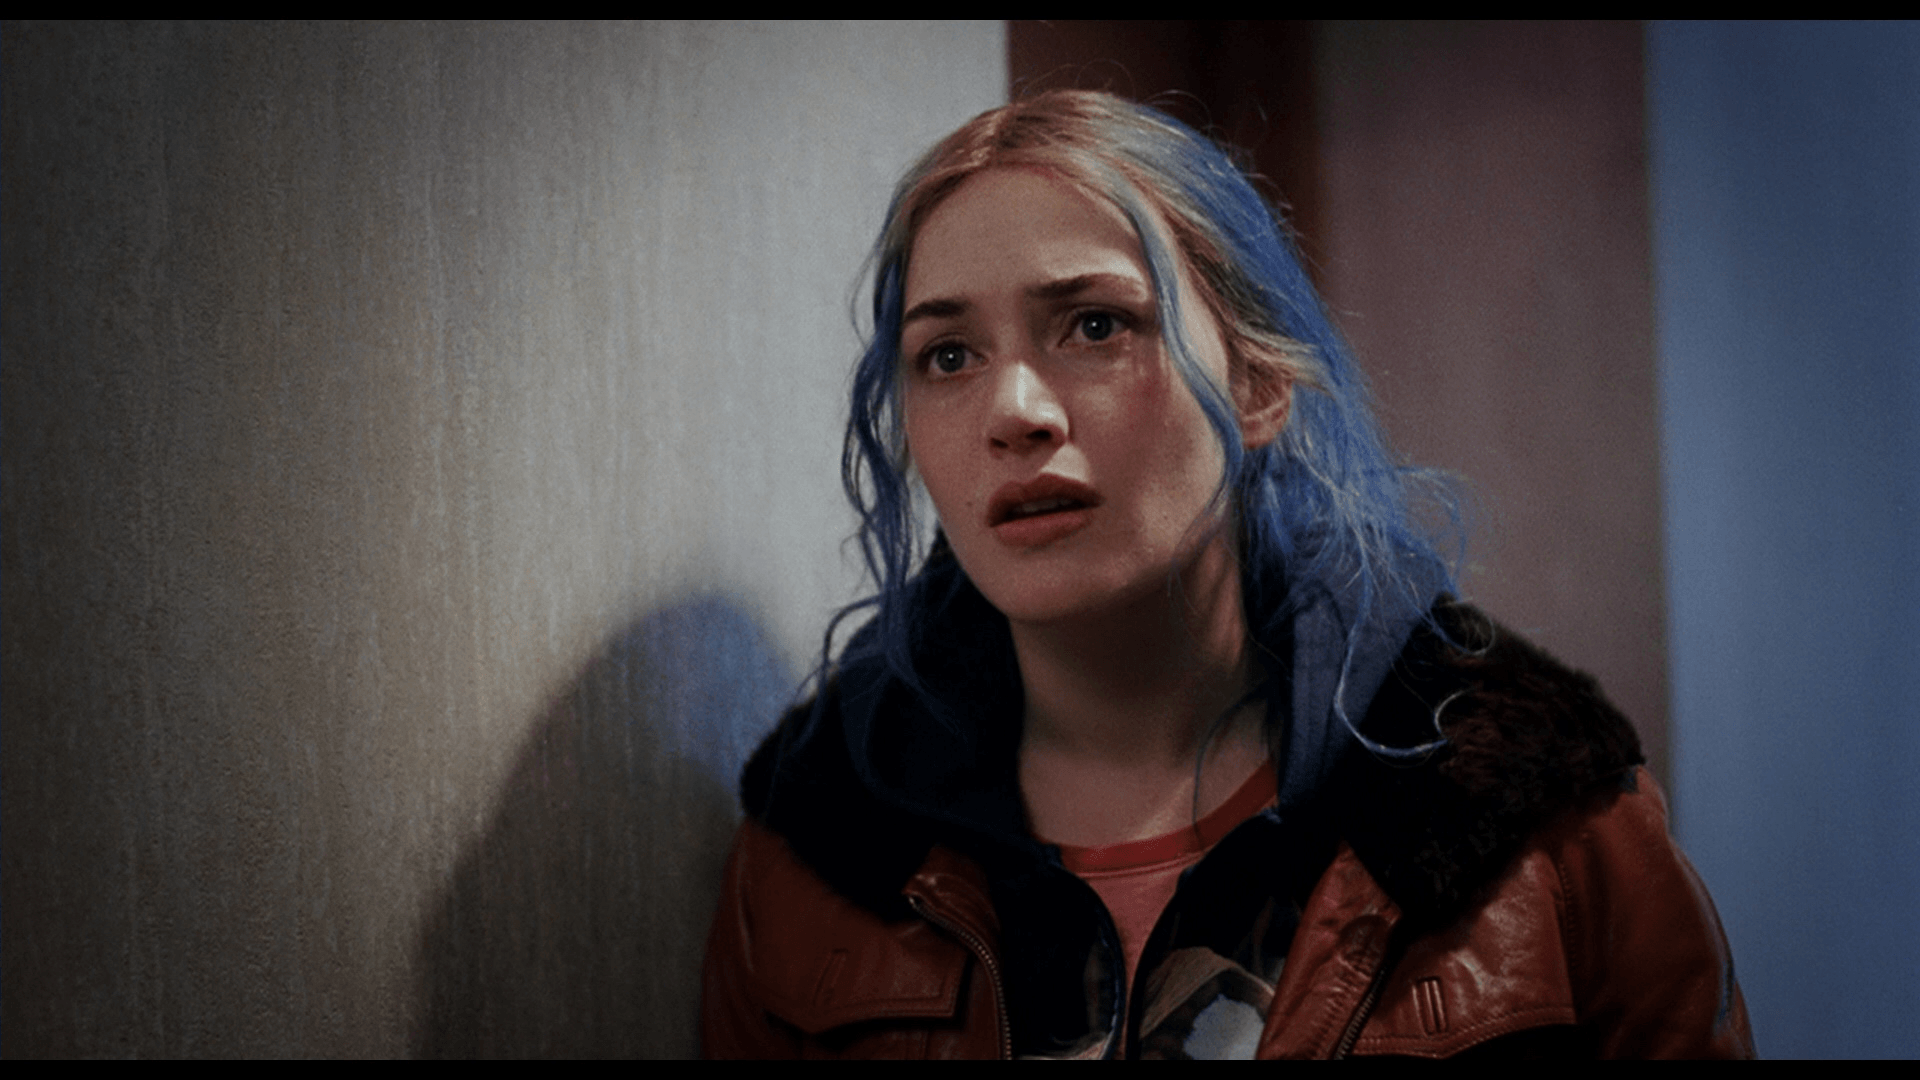 Movies That Everyone Should See: “Eternal Sunshine of the Spotless